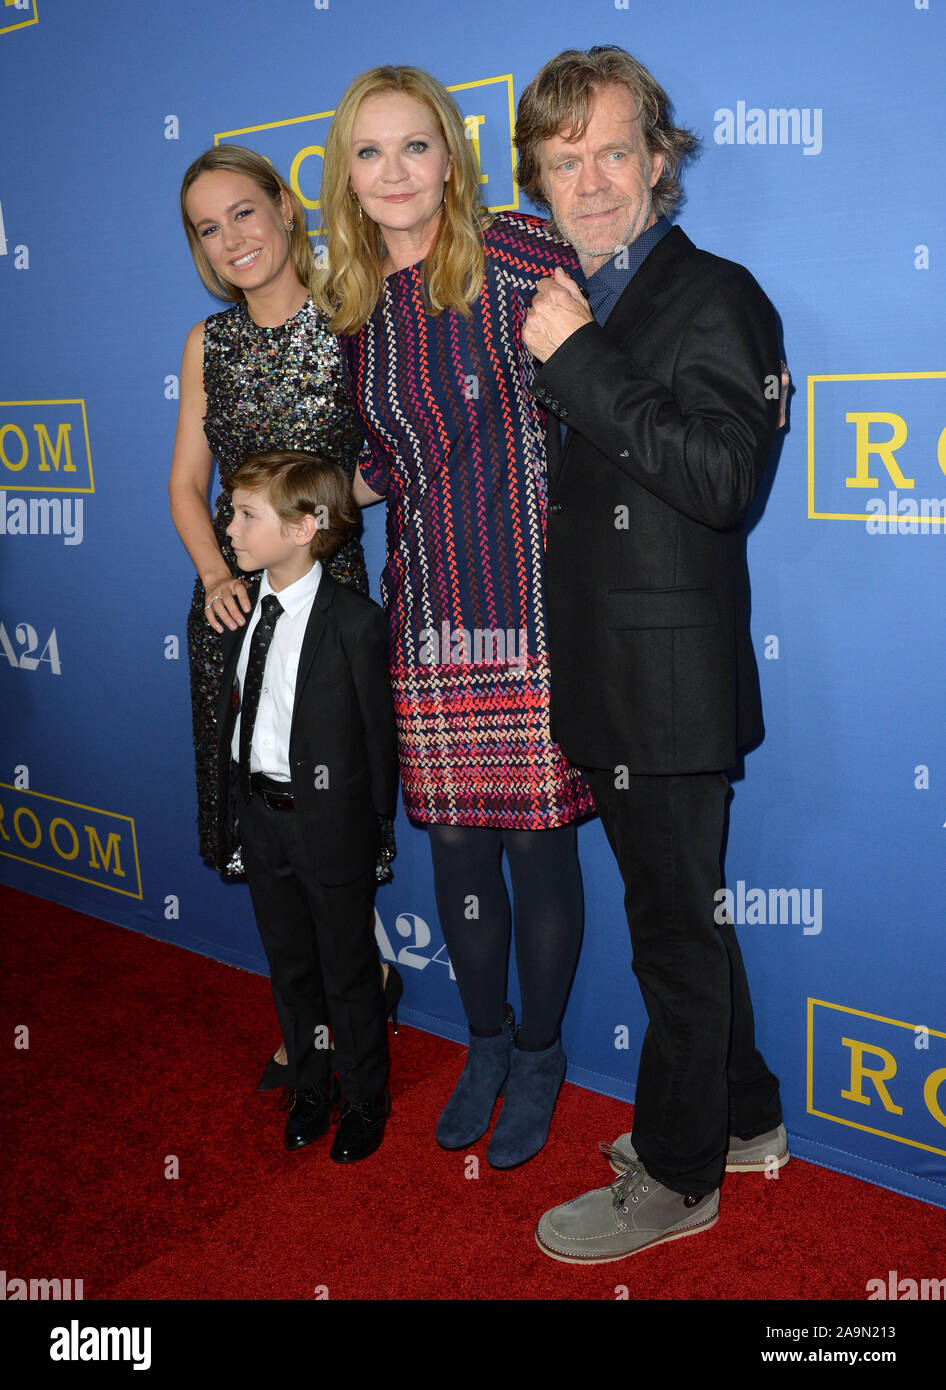 Los Angeles Ca October 13 15 William H Macy Brie Larson Joan Allen Jacob Tremblay At The Los Angeles Premiere Of Their Movie Room At The Pacific Design Centre West Hollywood C